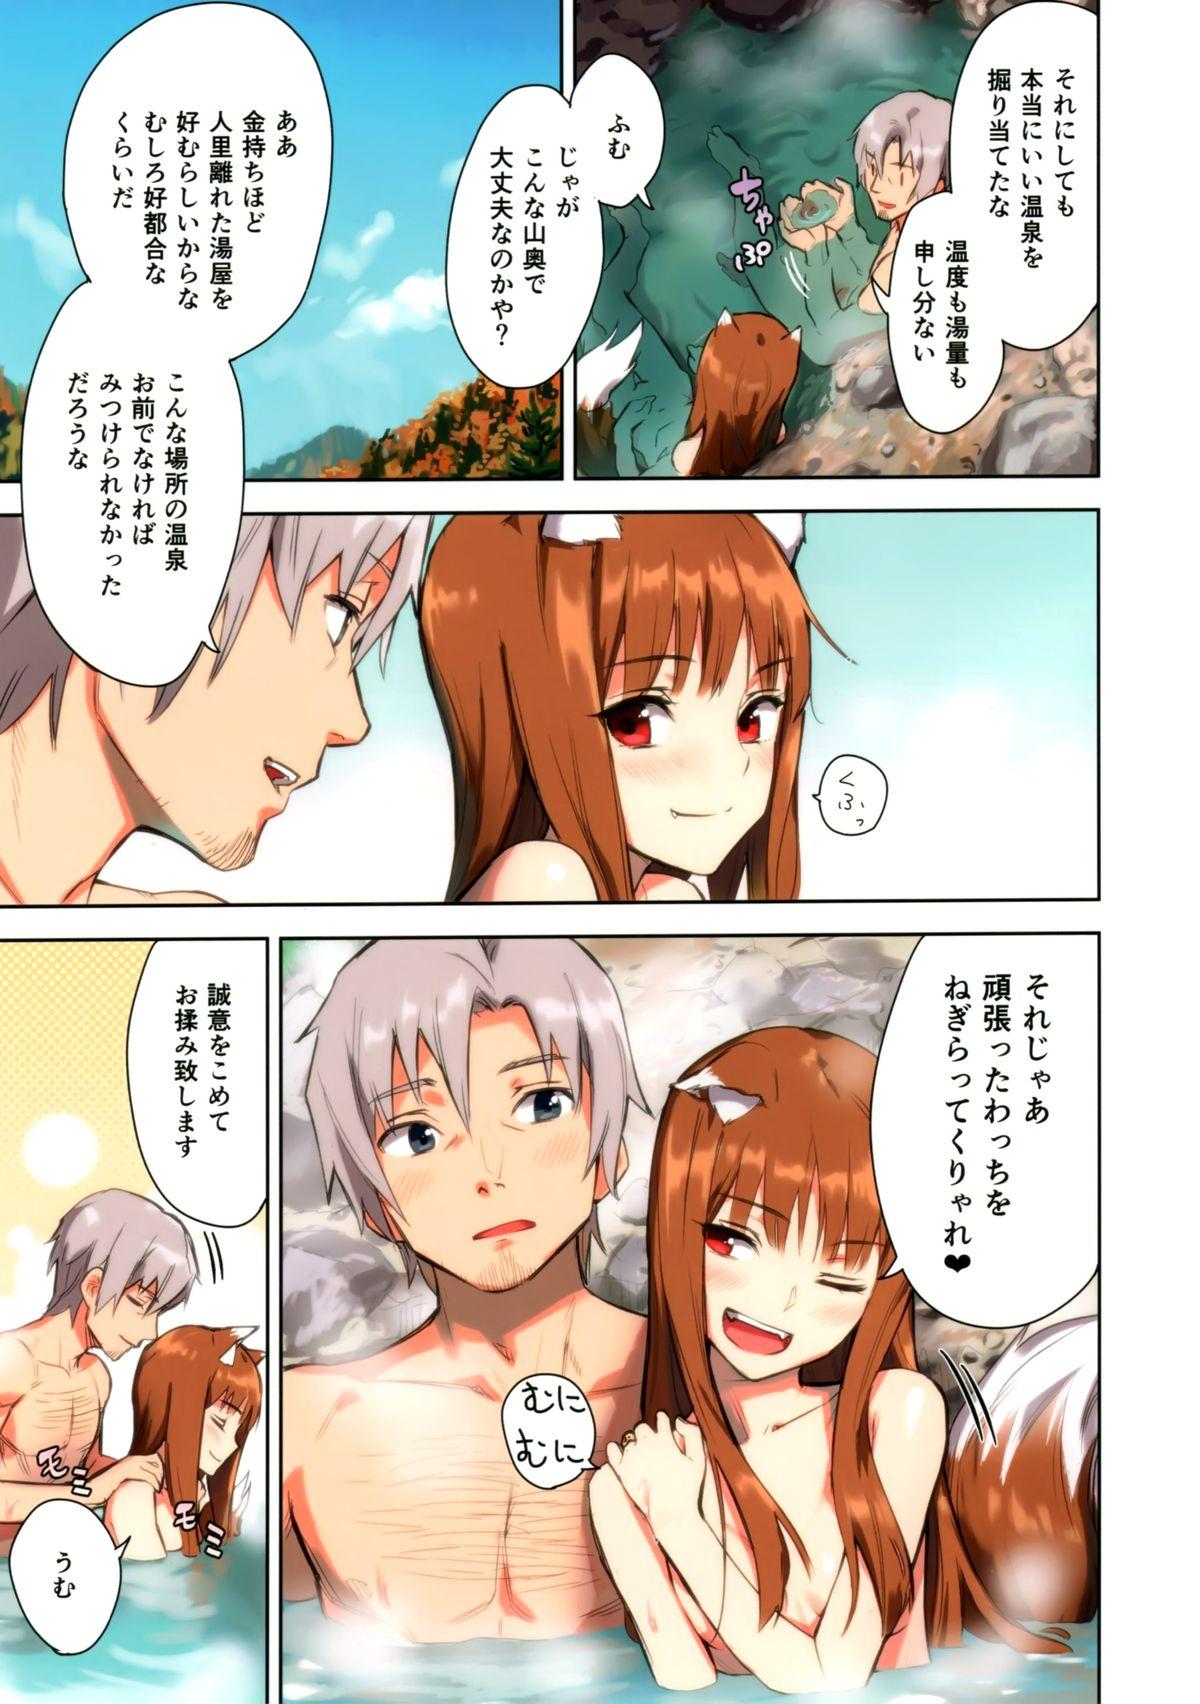 Bigtits Wacchi to Nyohhira Bon FULL COLOR - Spice and wolf Cocksuckers - Page 7